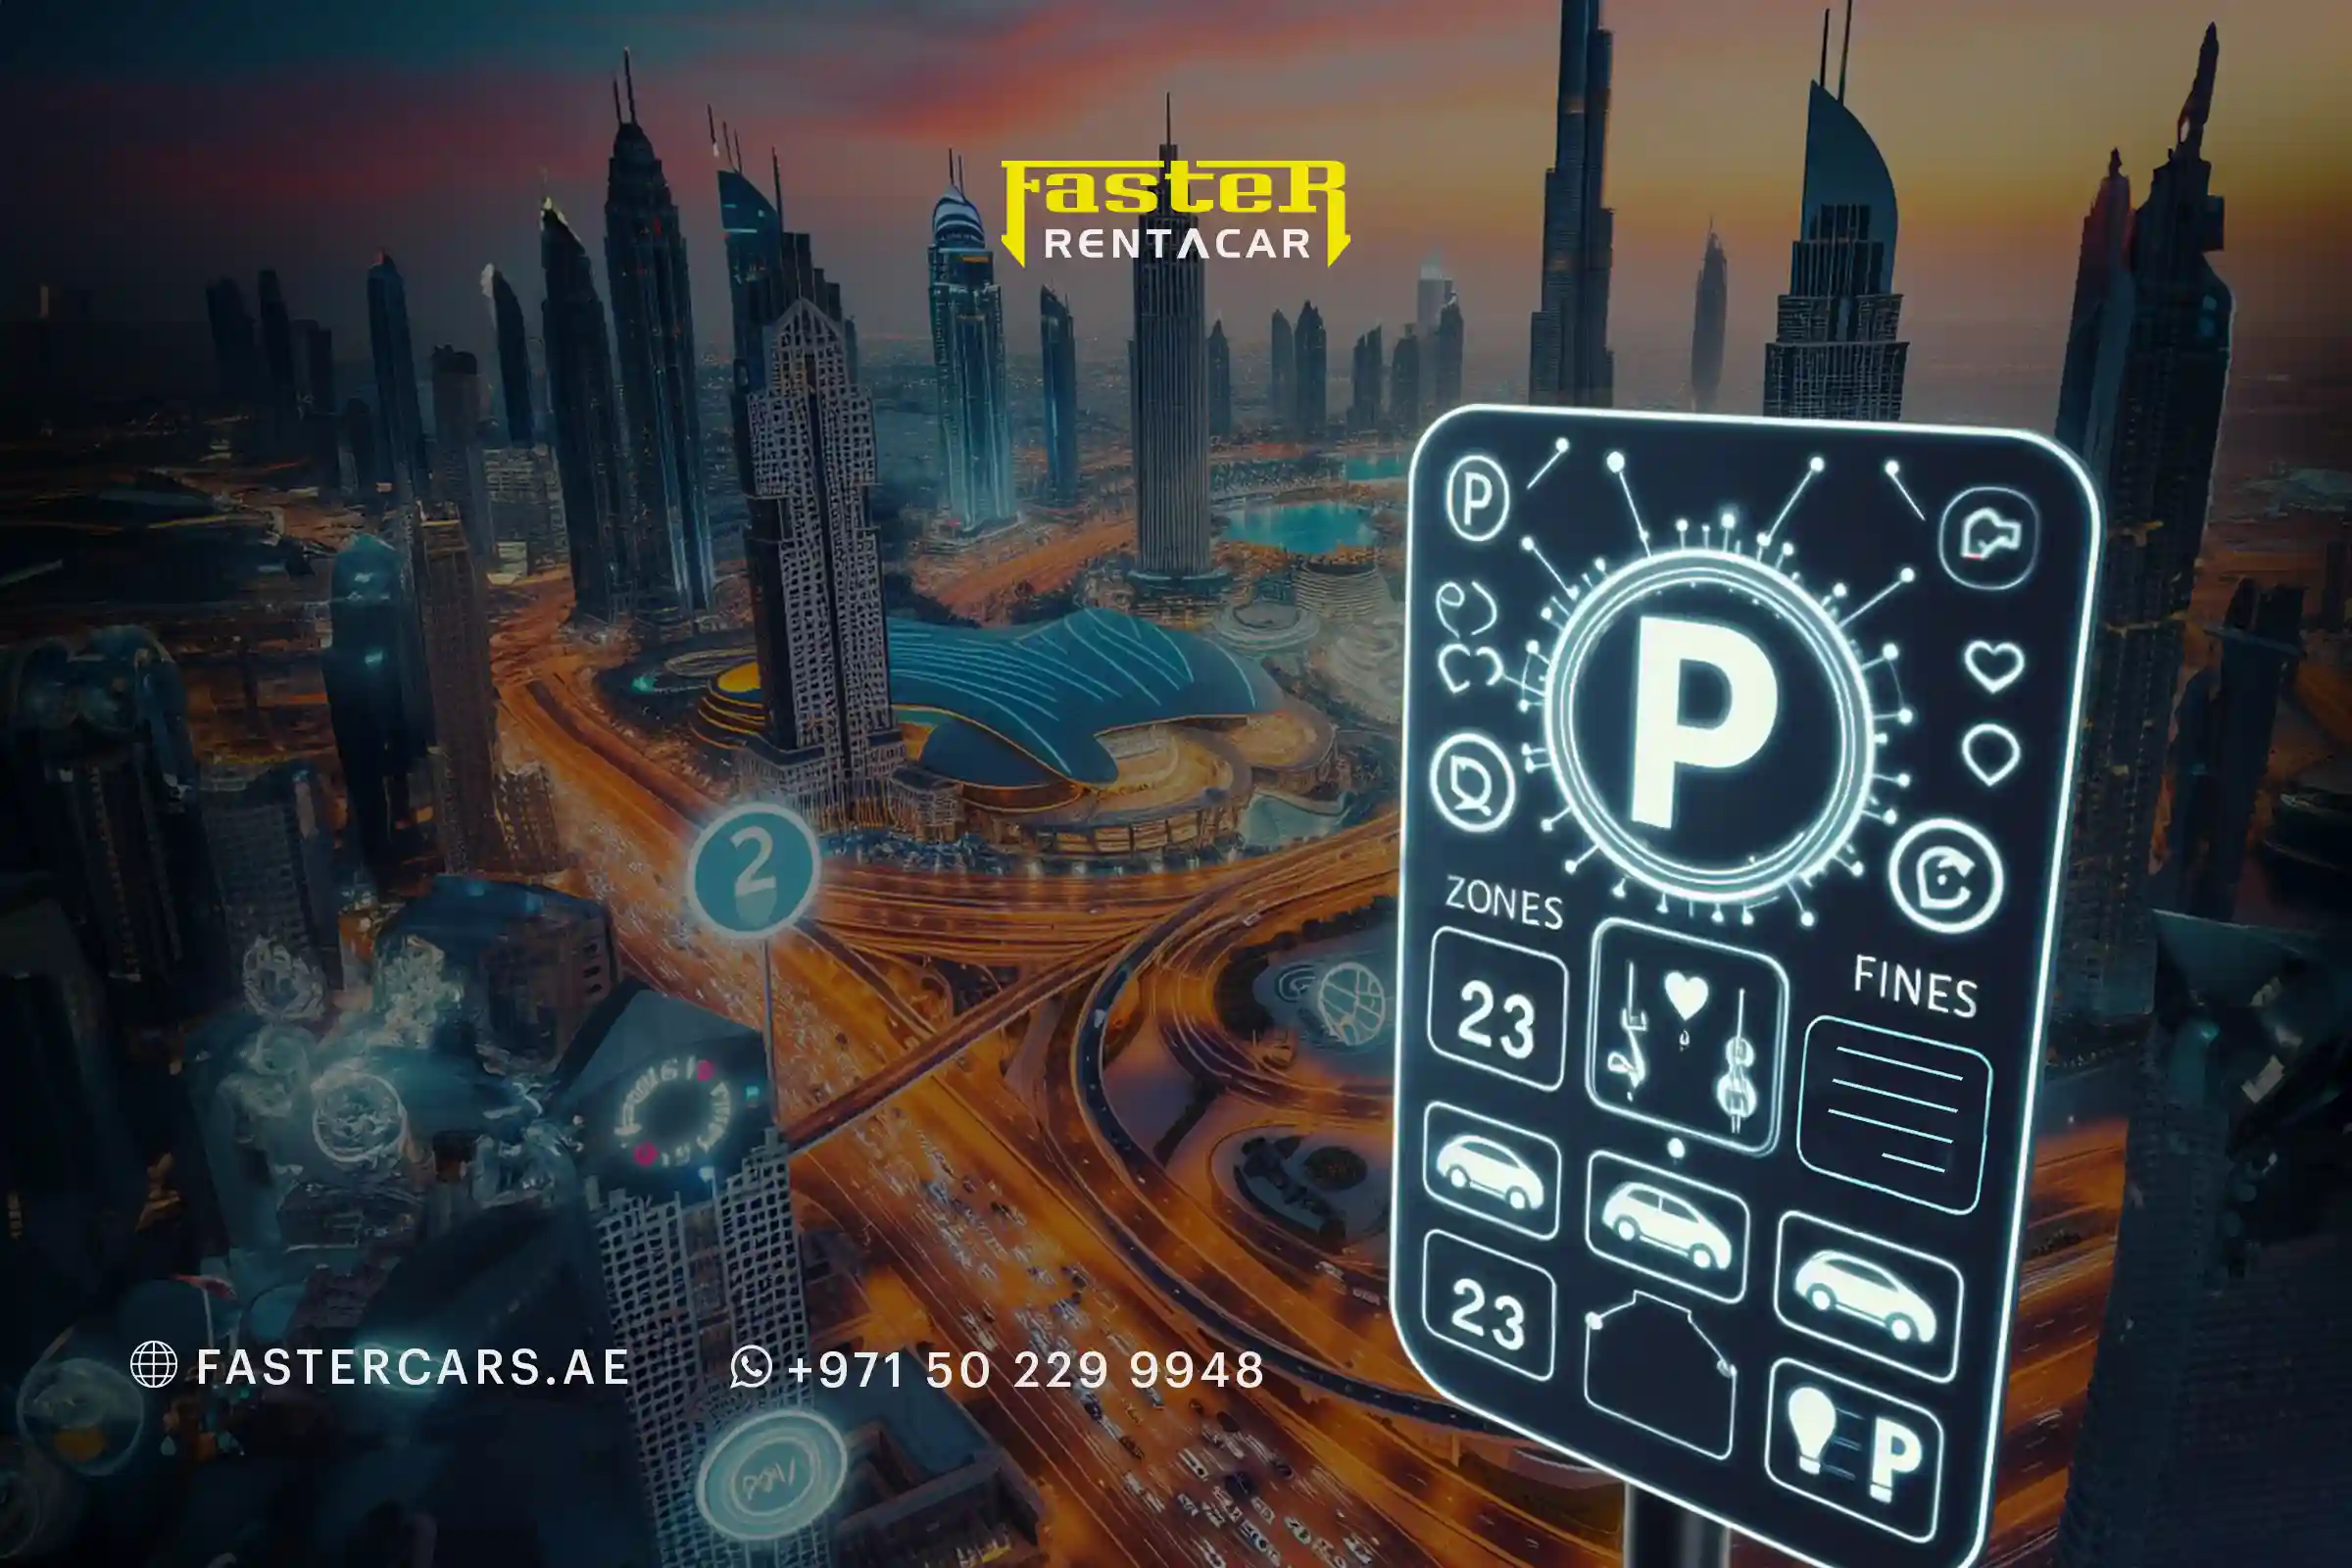 A Comprehensive Guide for Dubai Parking Charges, Zones & Fines